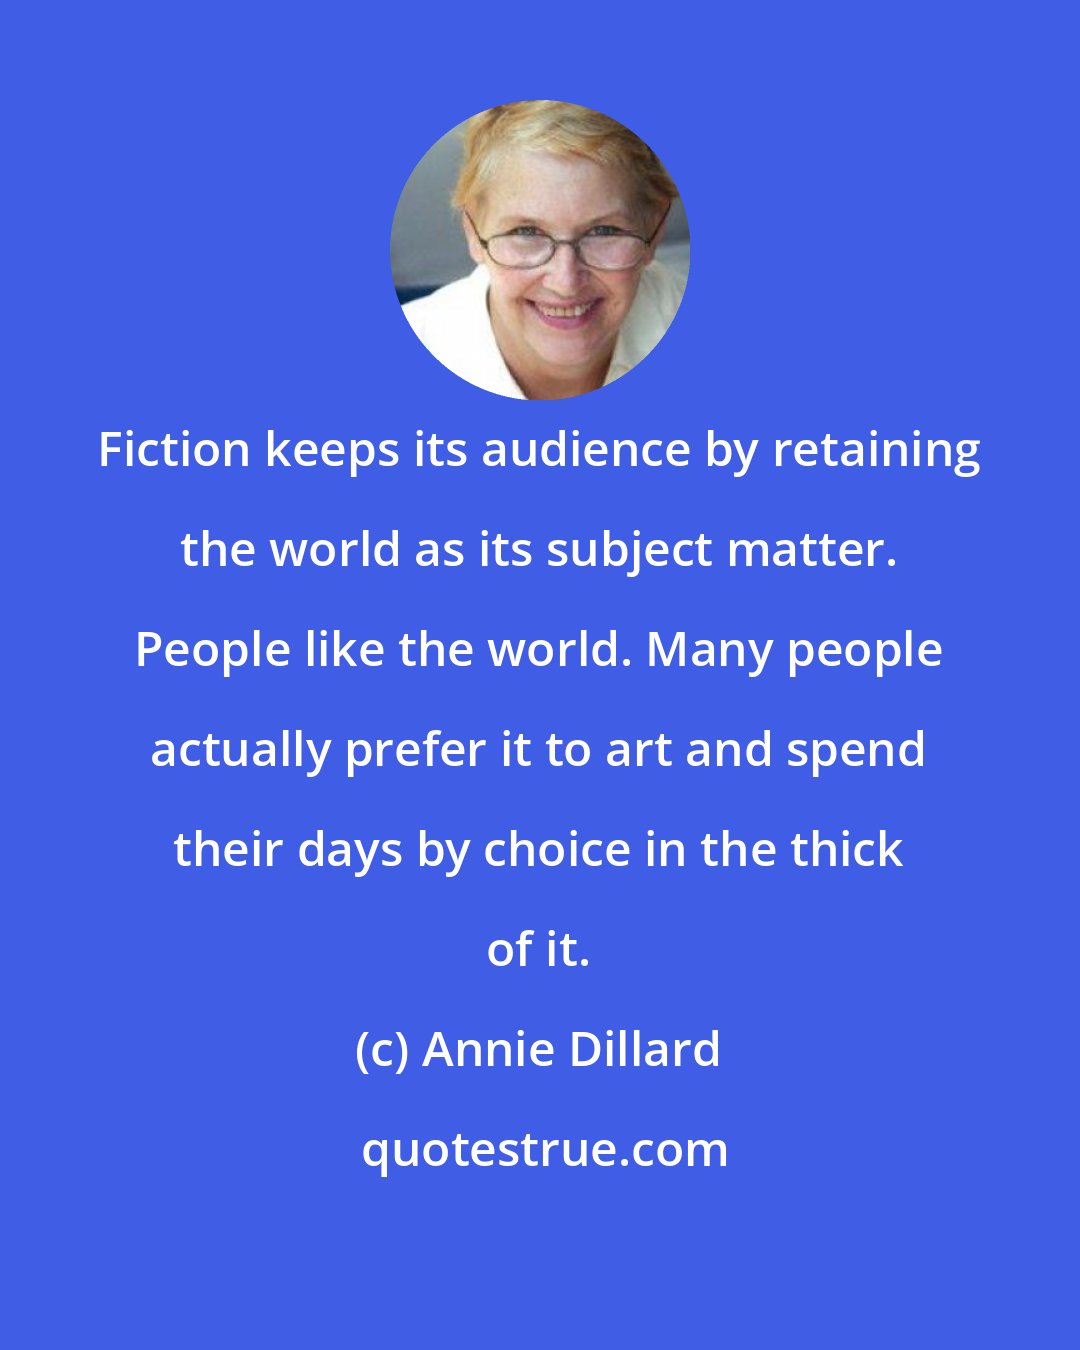 Annie Dillard: Fiction keeps its audience by retaining the world as its subject matter. People like the world. Many people actually prefer it to art and spend their days by choice in the thick of it.